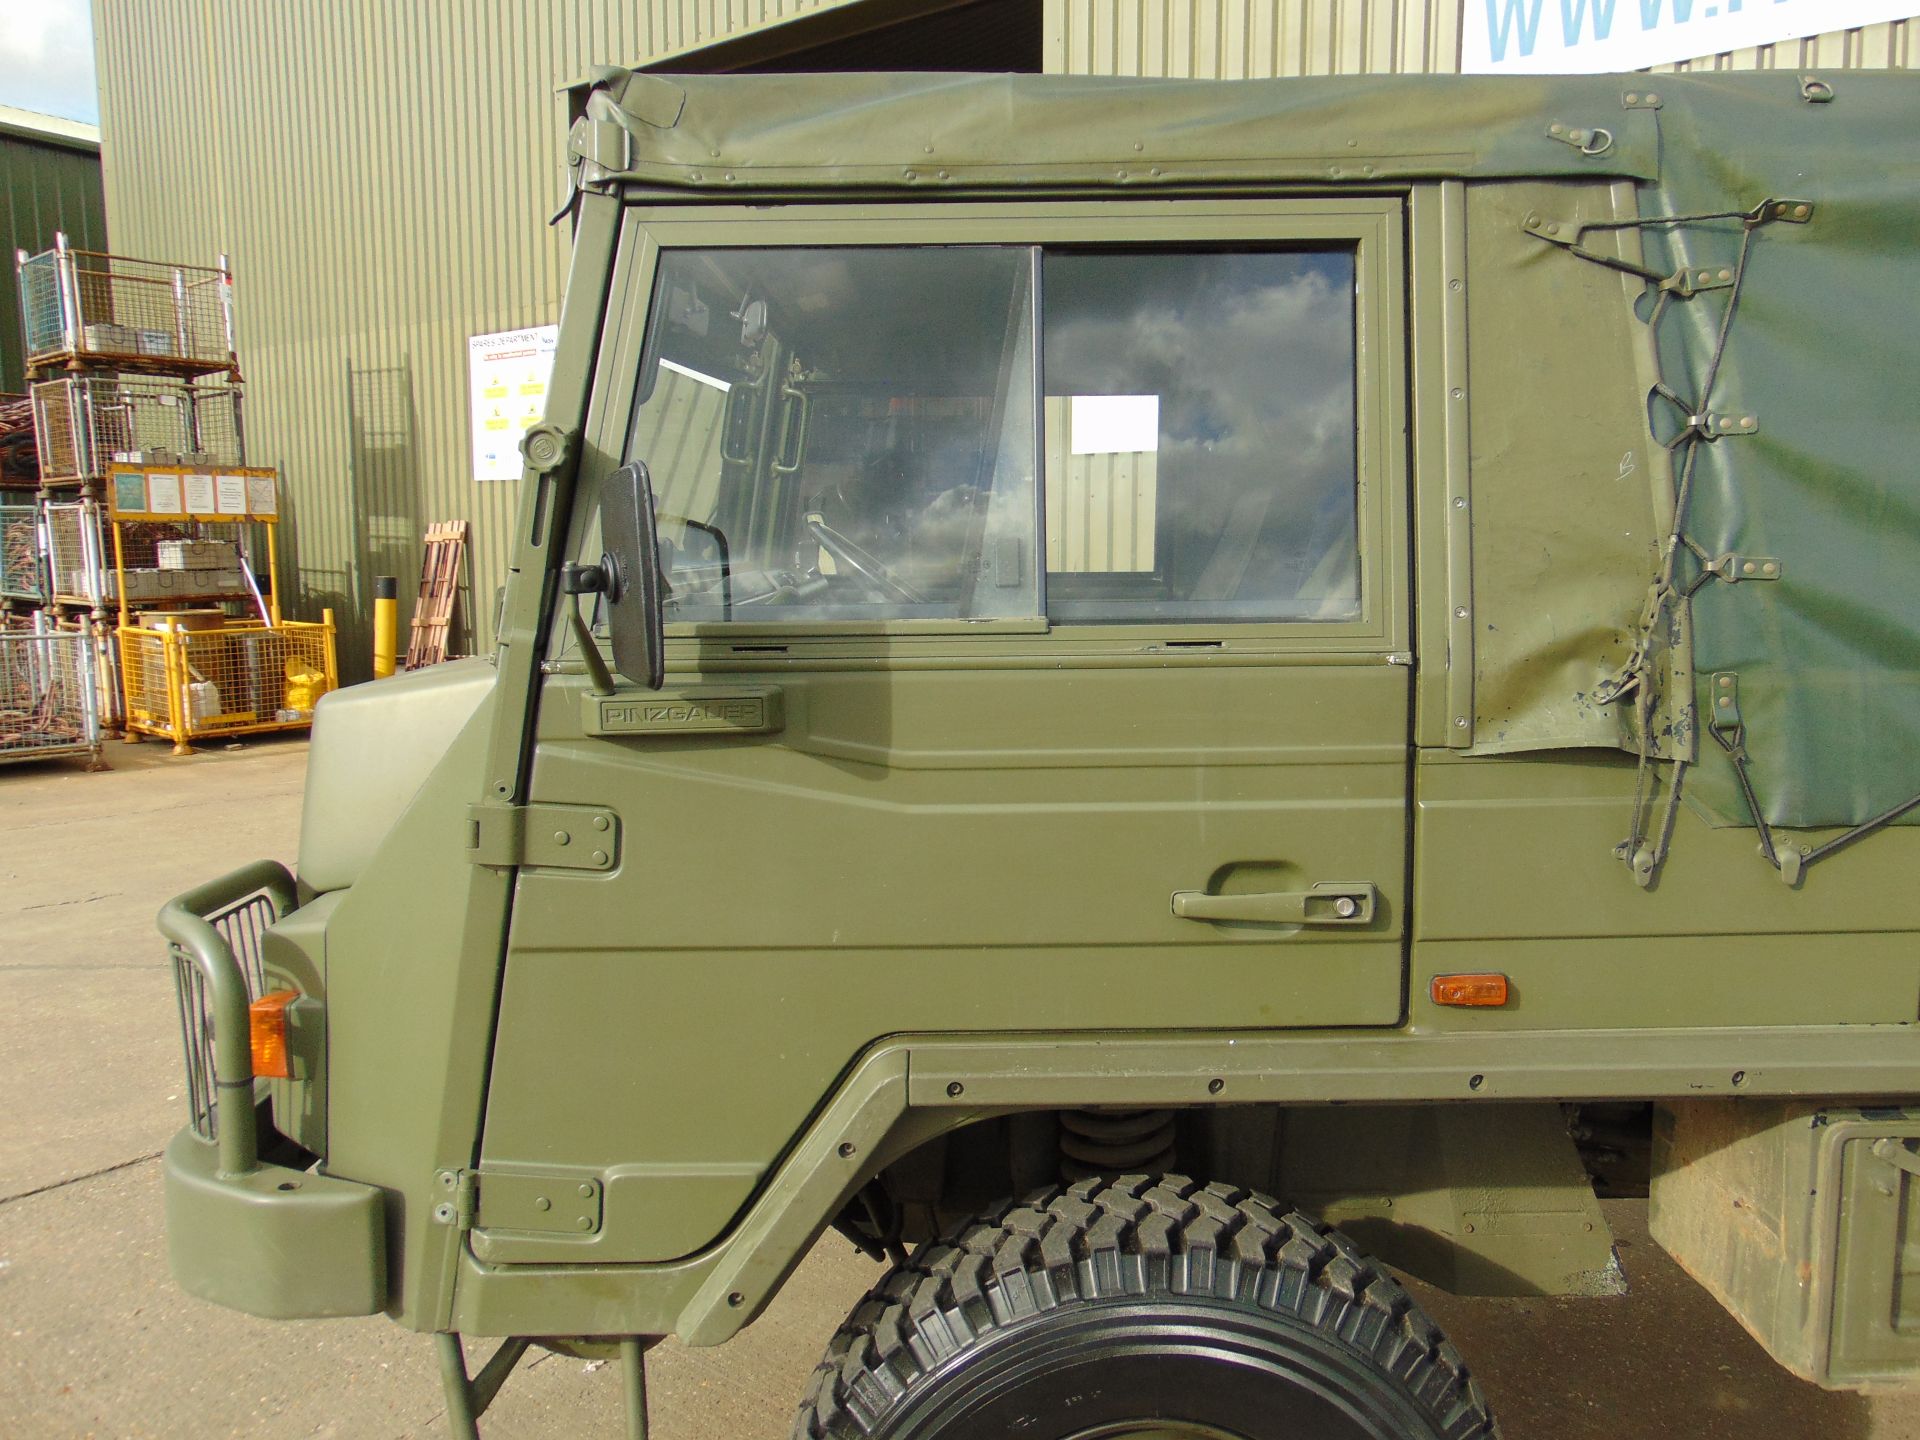 Pinzgauer 716 RHD soft top - only 7235 recorded miles! - Image 51 of 61